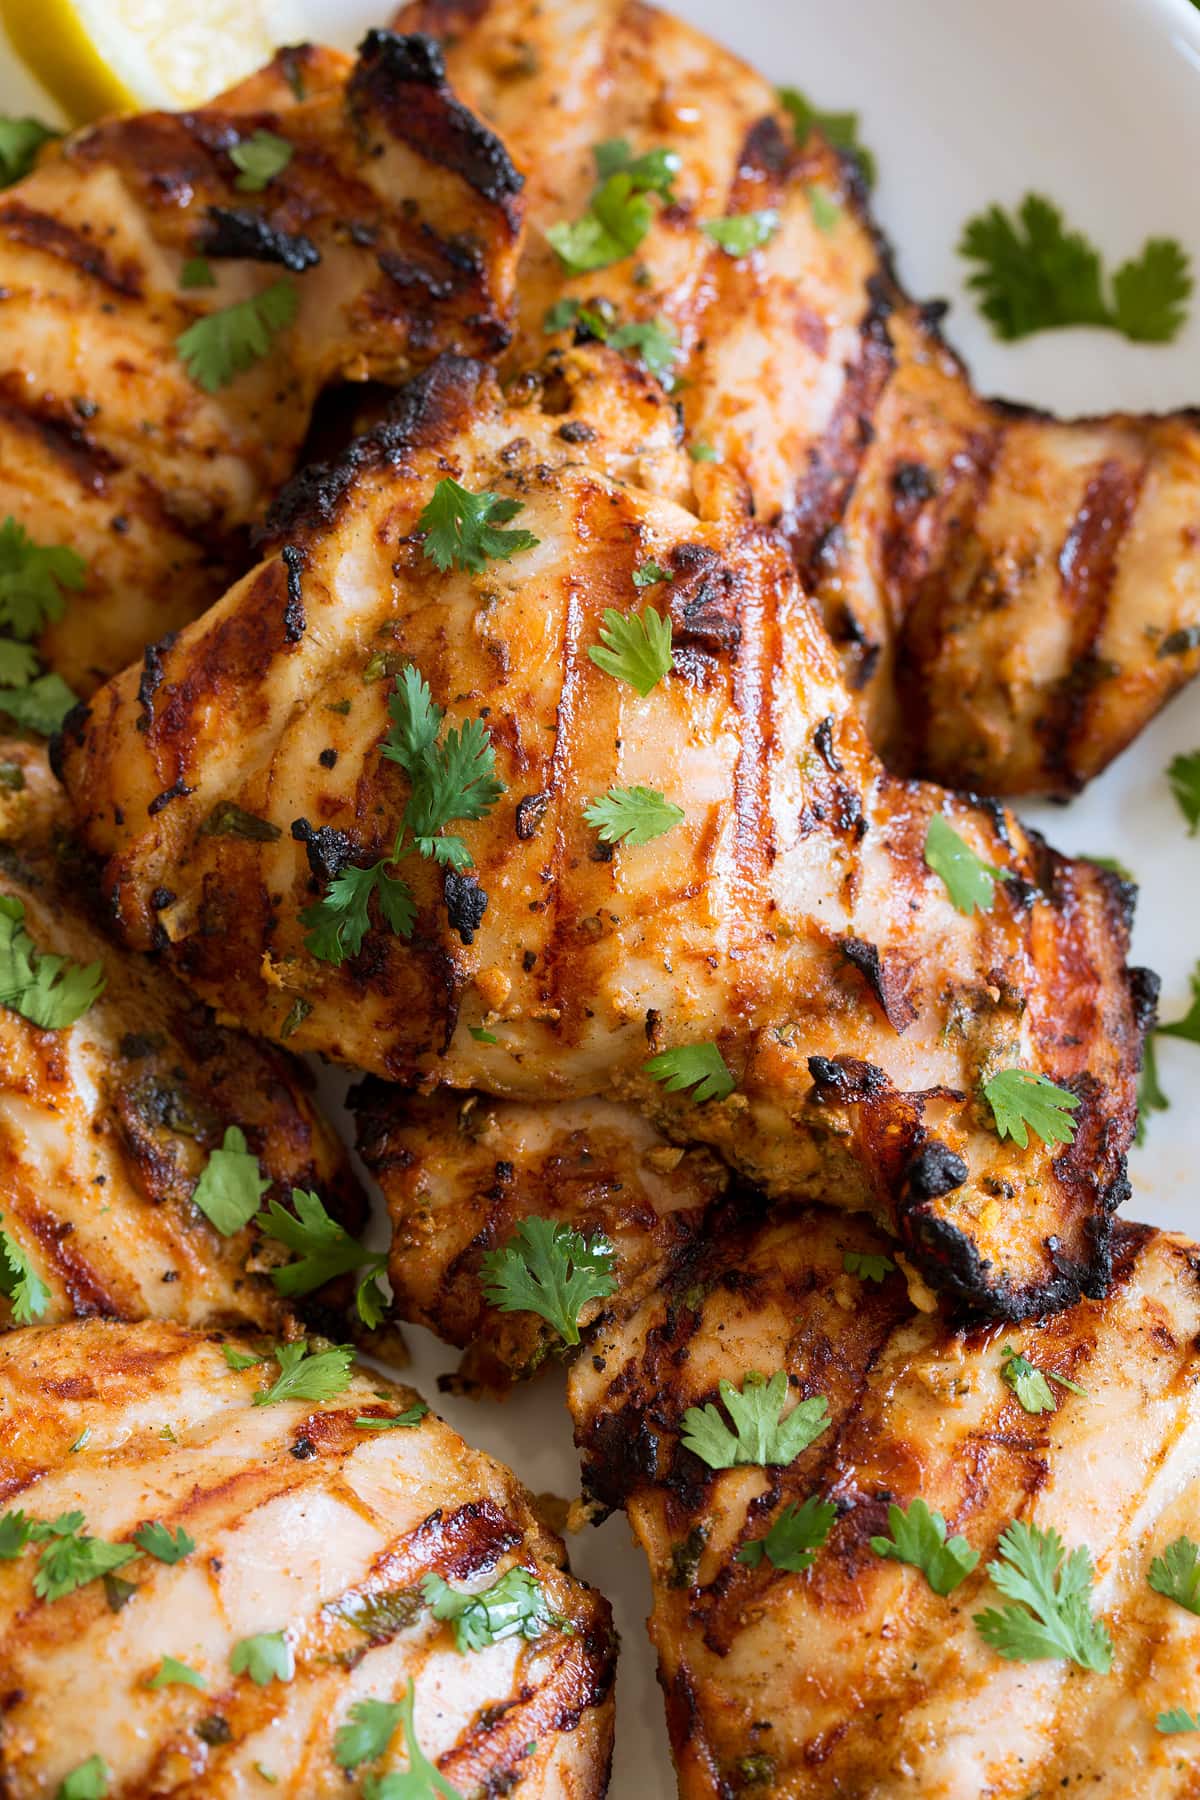 Close-up photo of grilled chicken thighs with yogurt marinade. The chicken is garnished with cilantro.